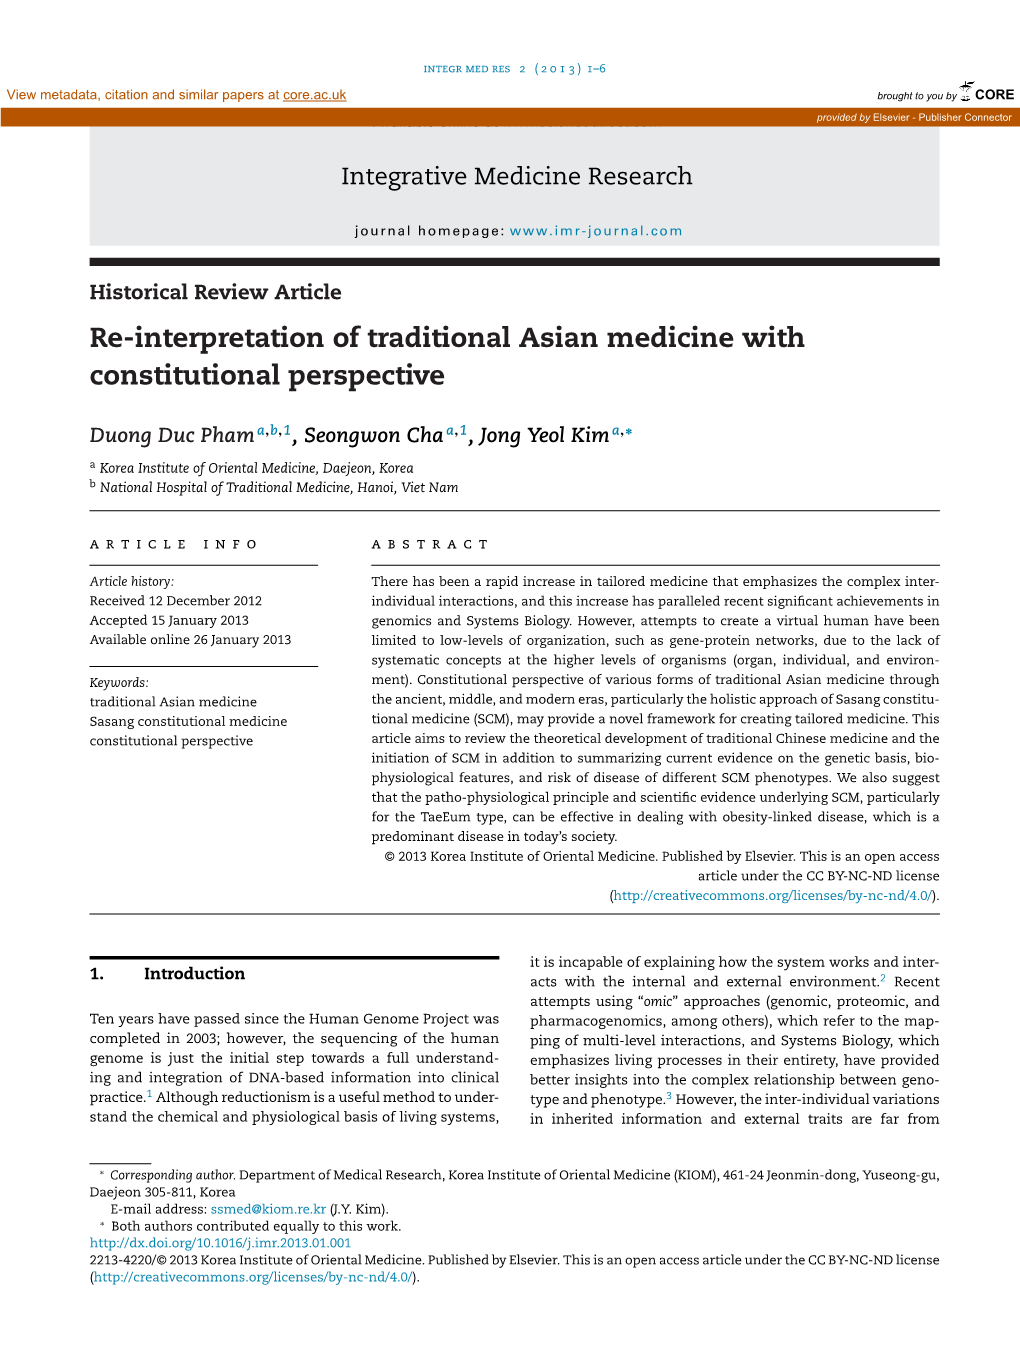 Re-Interpretation of Traditional Asian Medicine with Constitutional Perspective